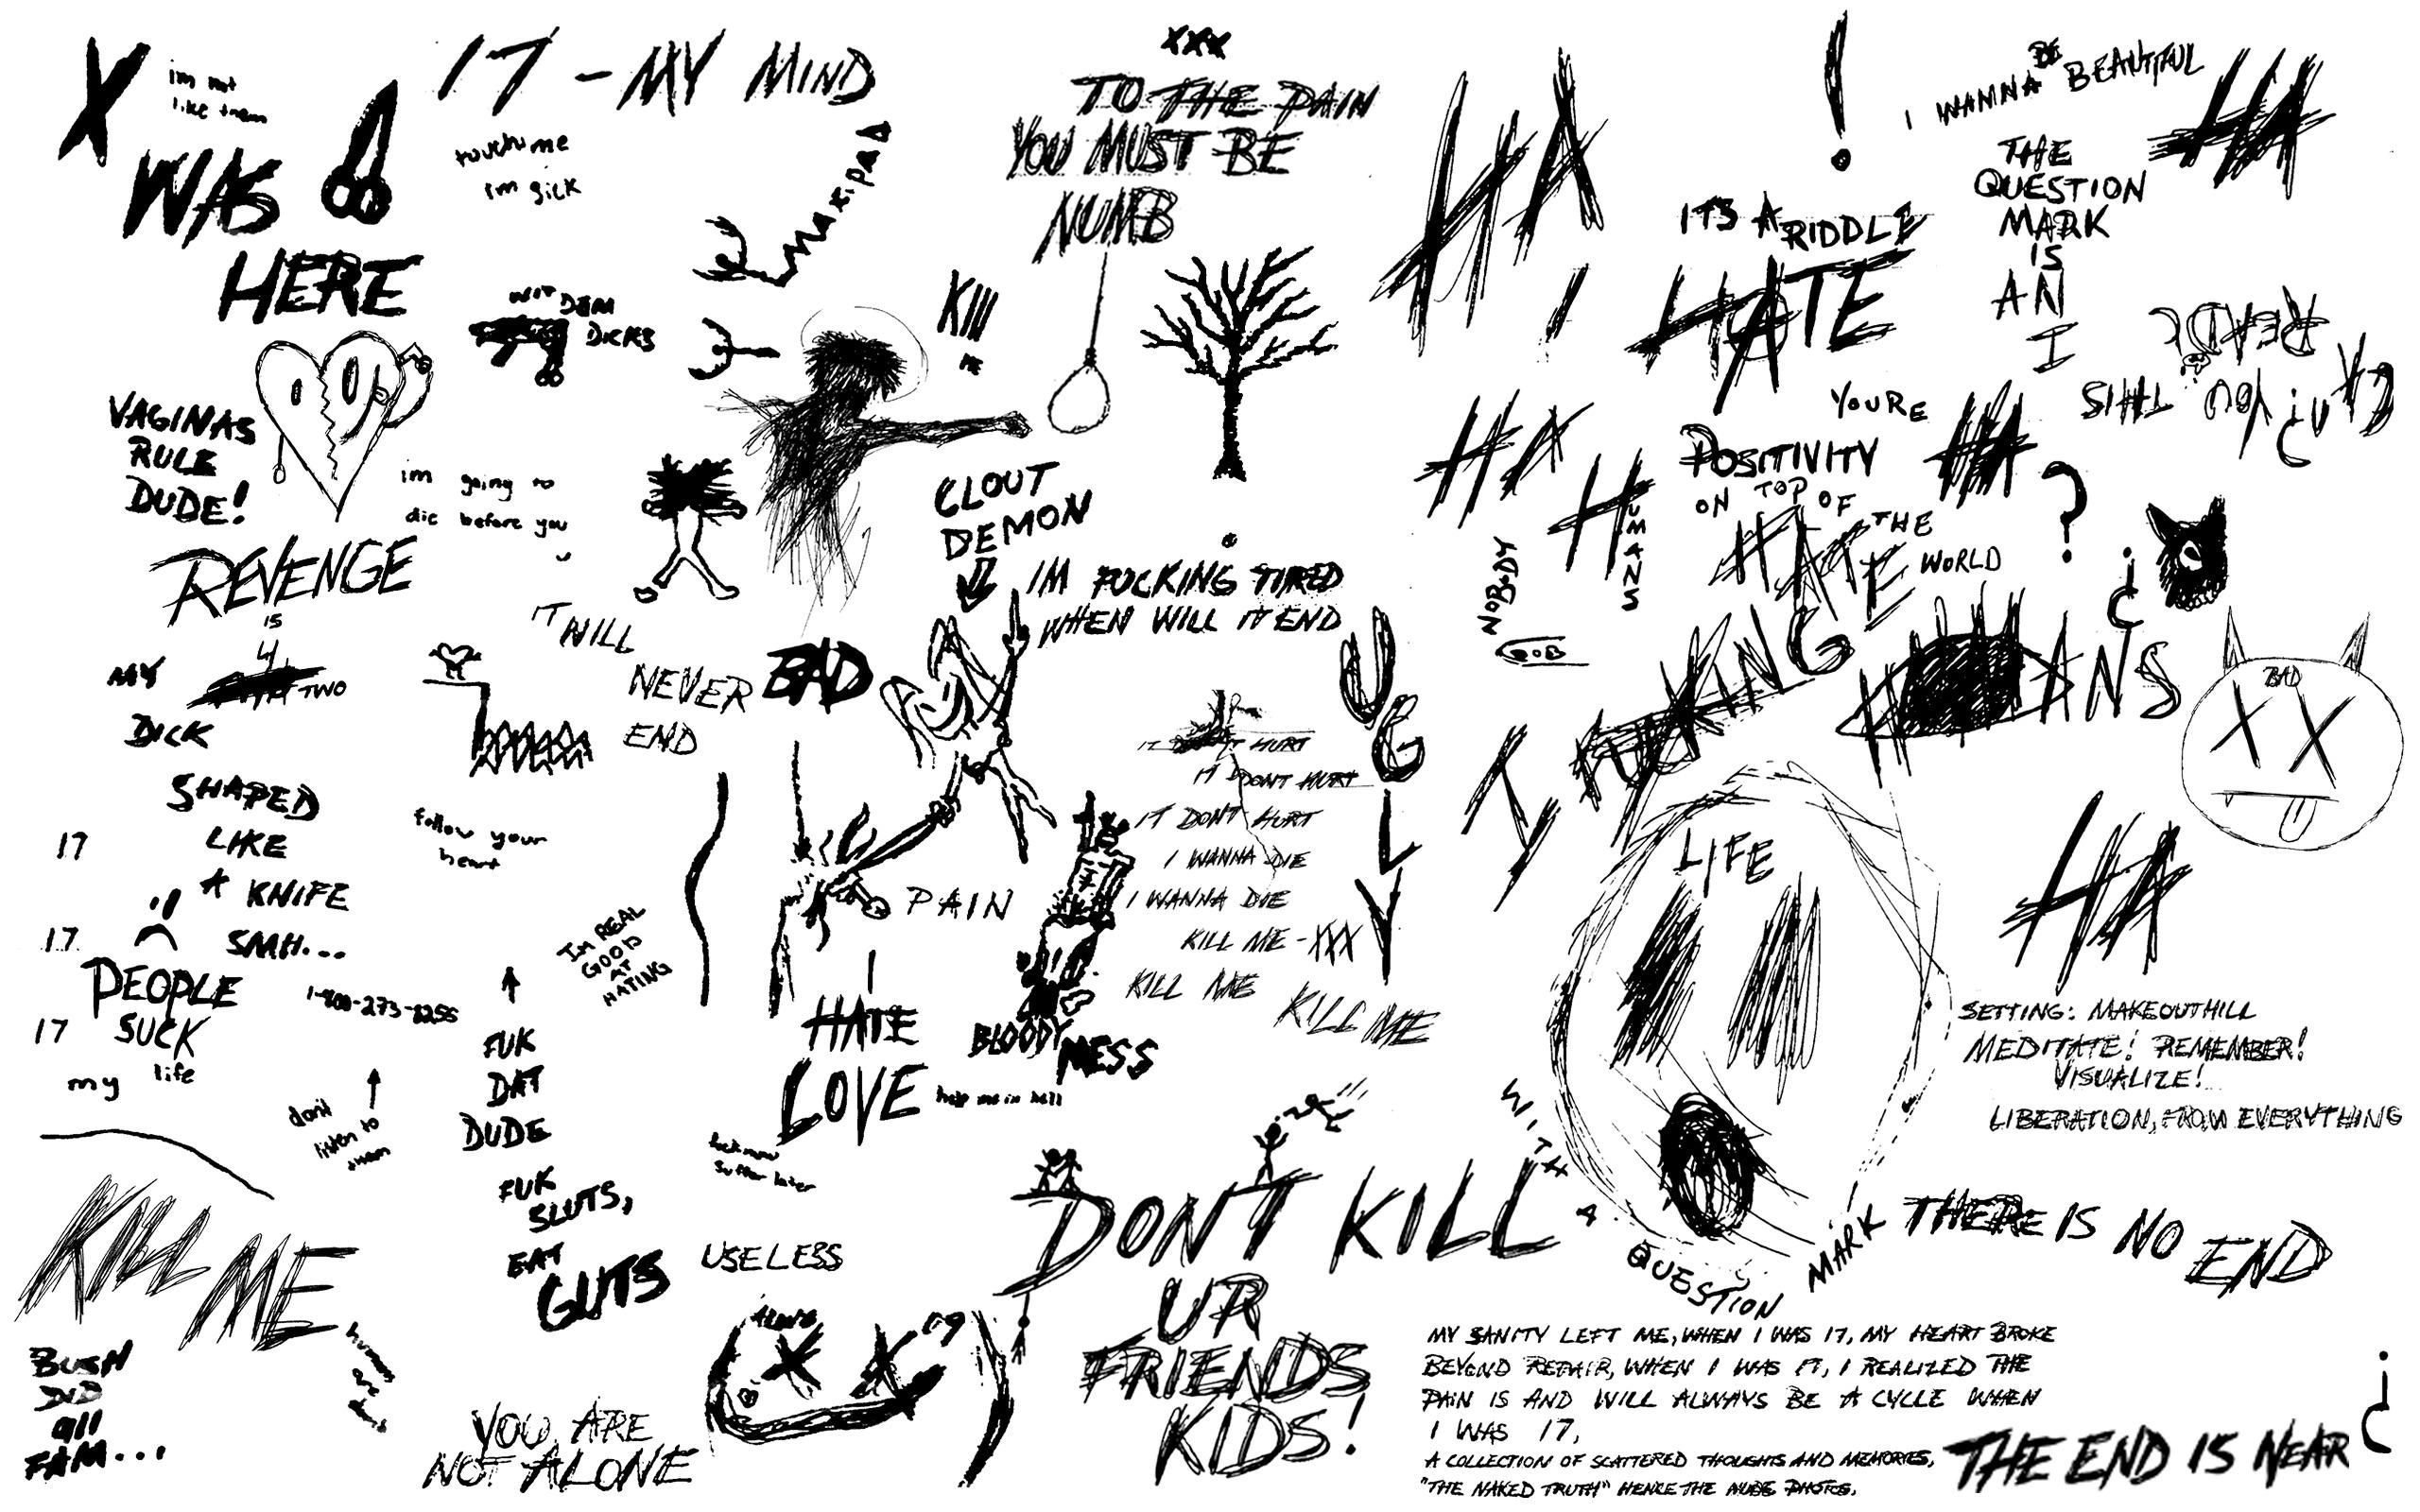 Made this xxxtentacion wallpaper out if his drawings Dont know